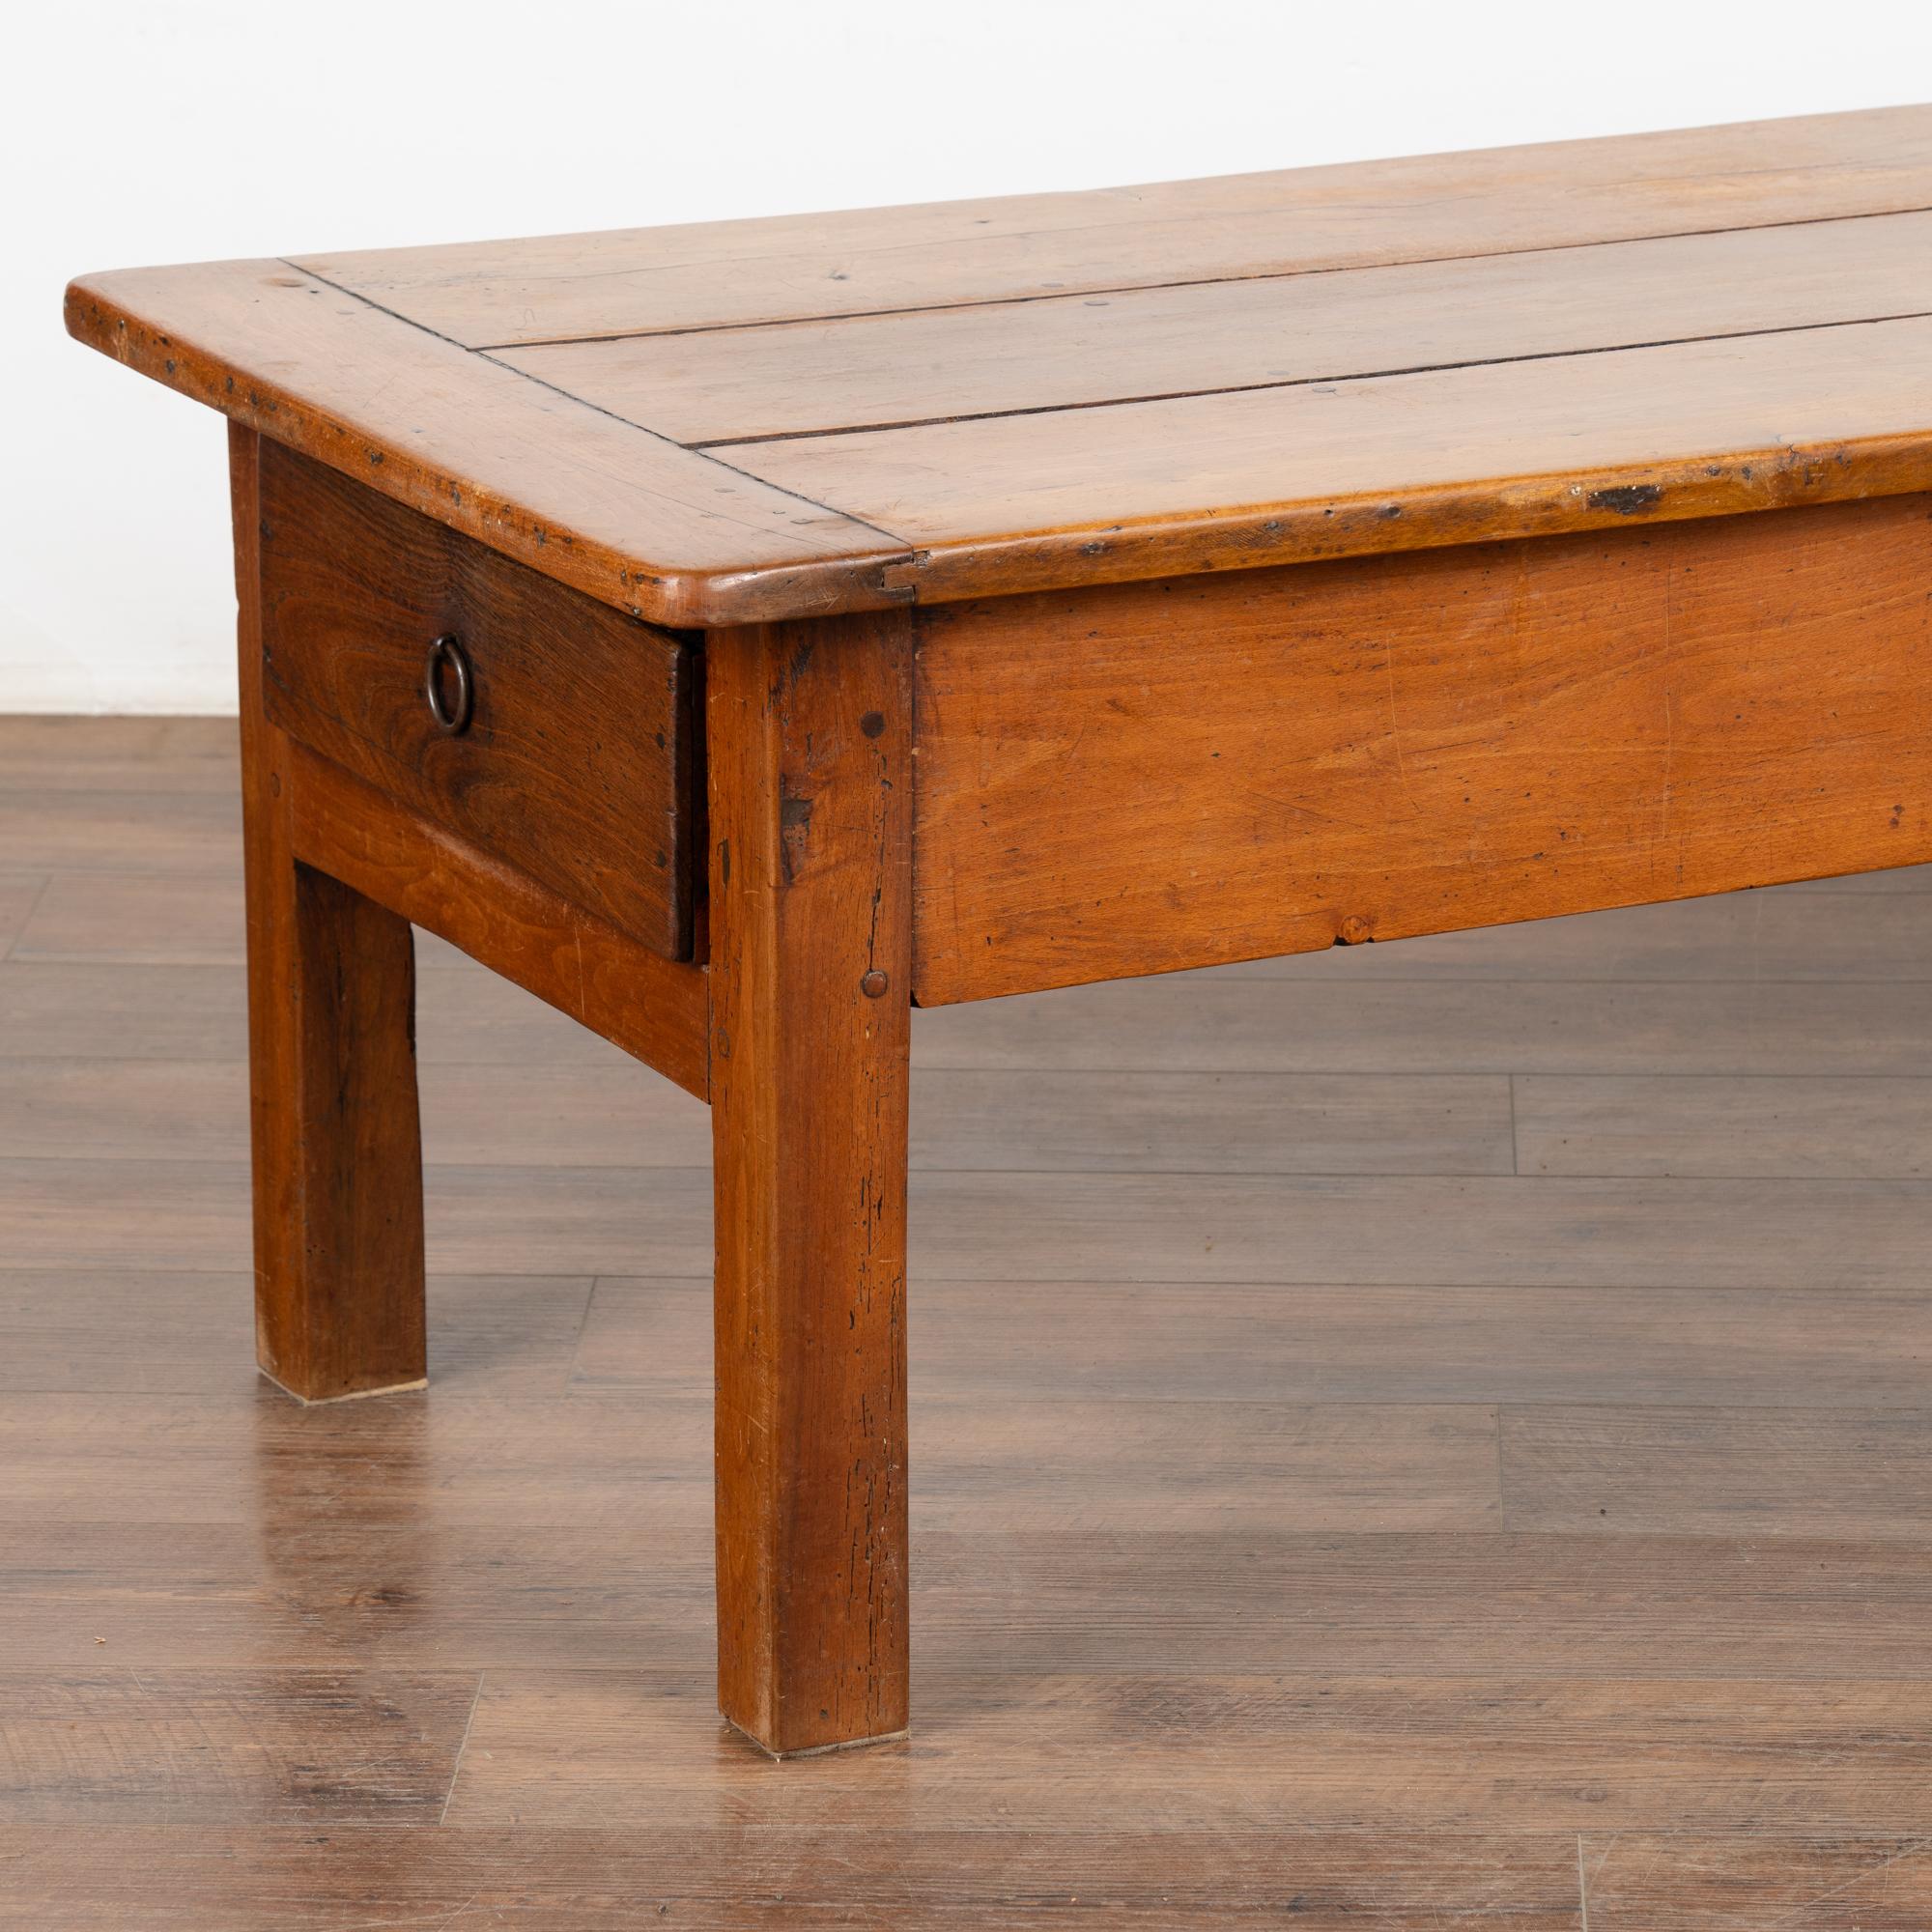 19th Century French Country Coffee Table with Two Drawers, circa 1820-40 For Sale